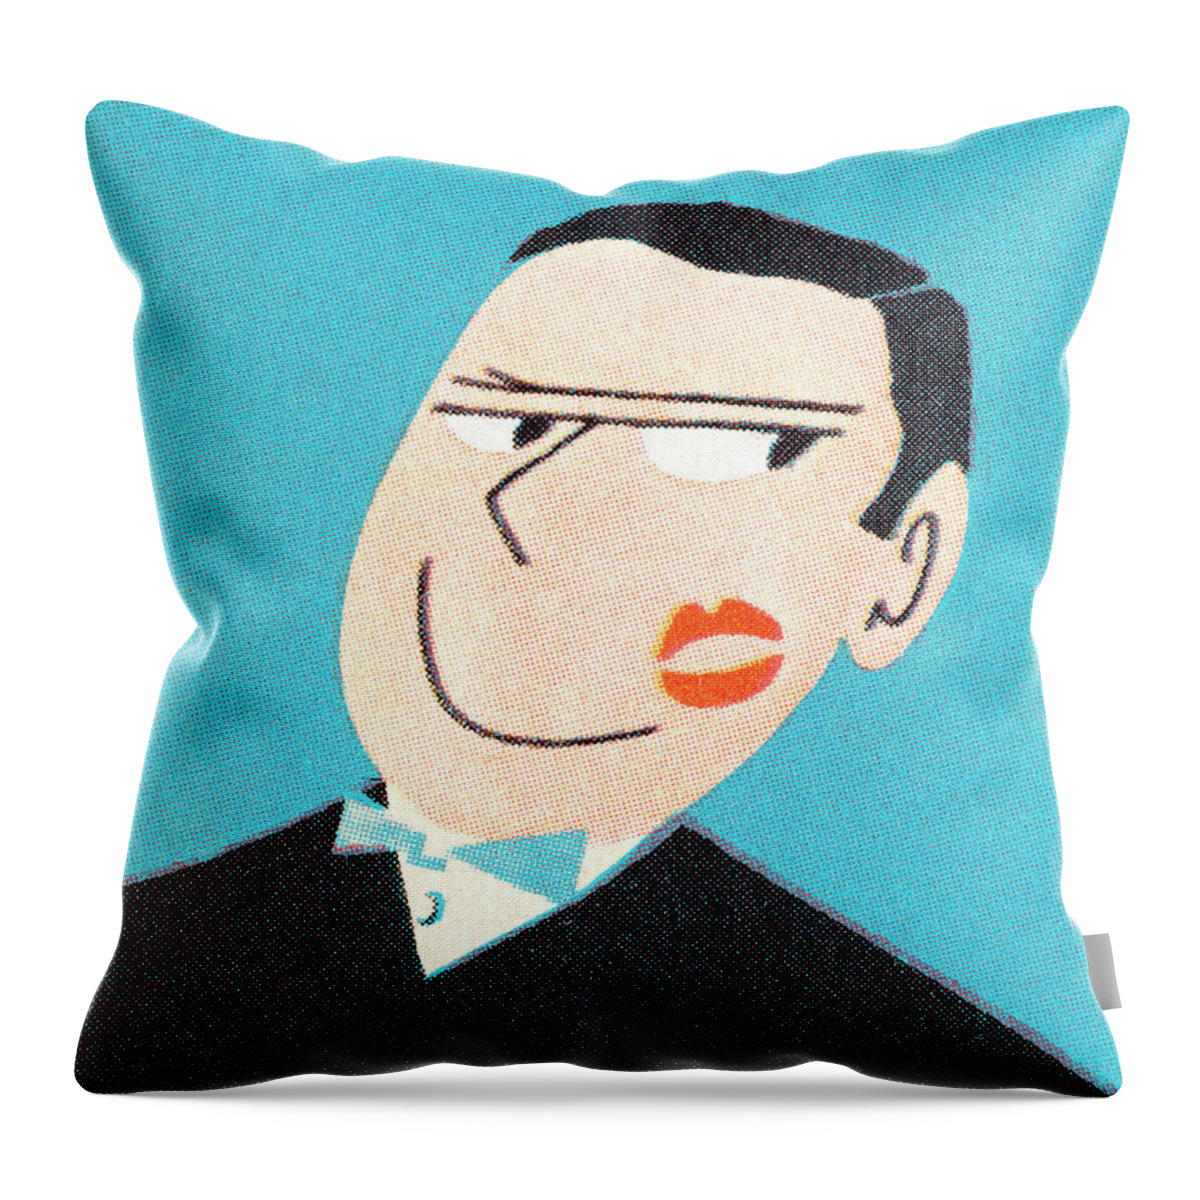 Adult Throw Pillow featuring the drawing Man with lipstick kiss on cheek by CSA Images